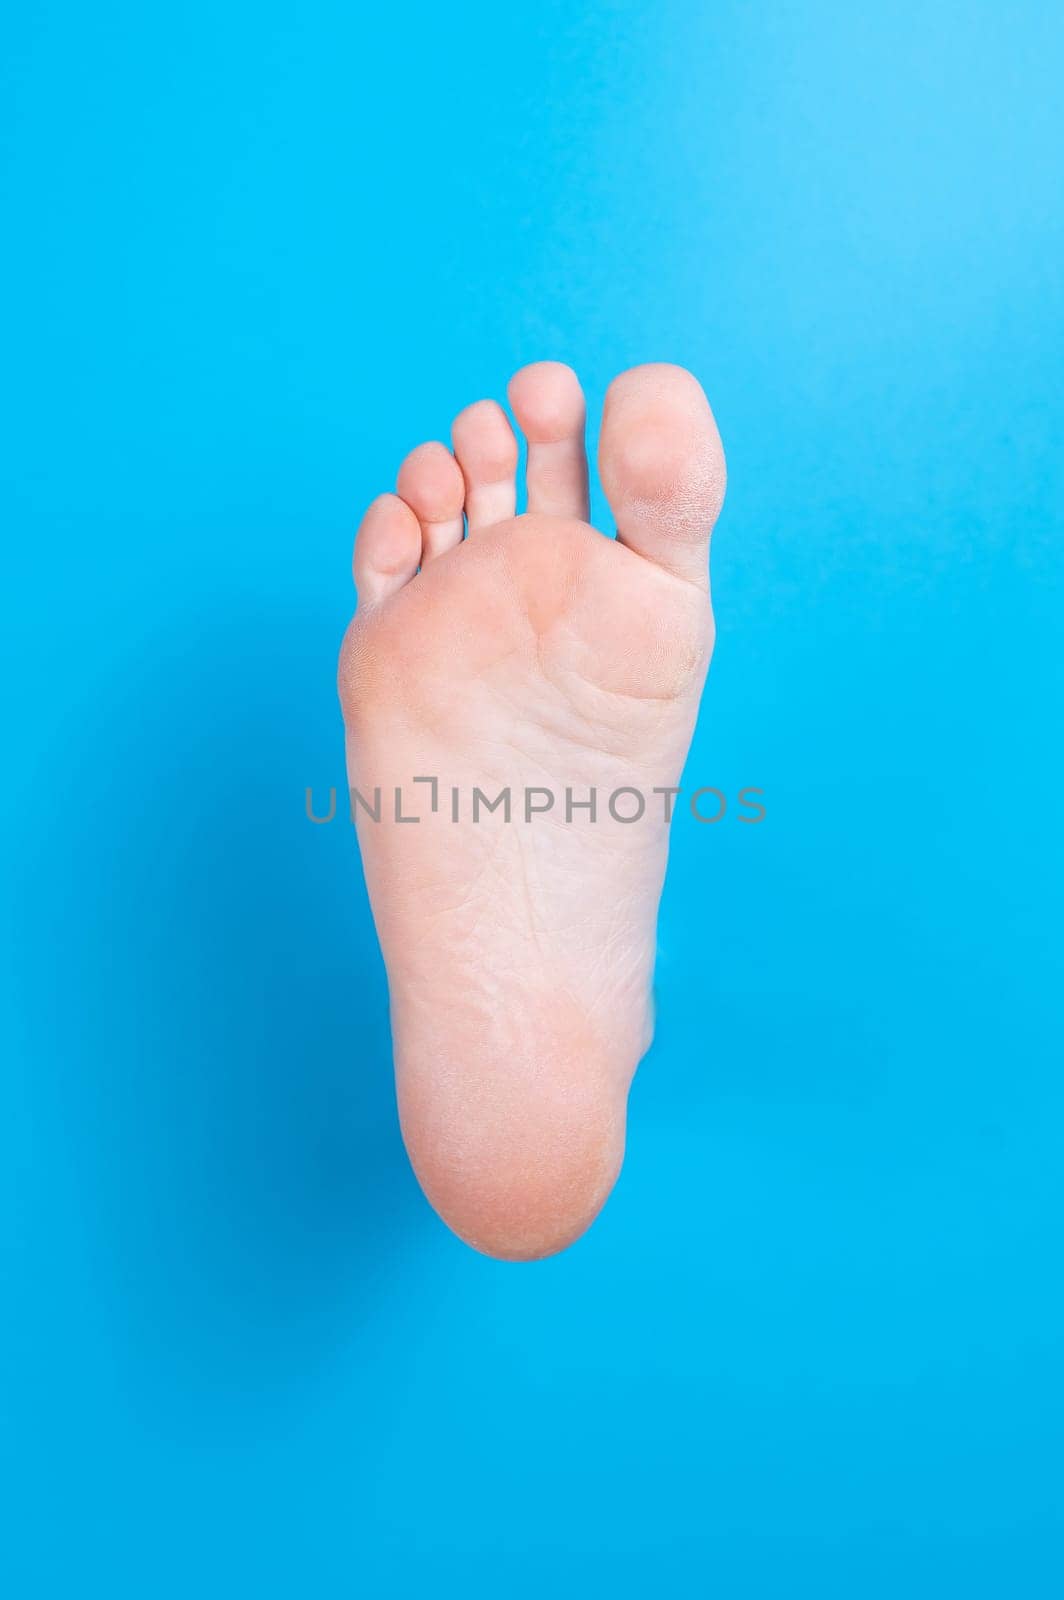 Female bare foot on a blue background